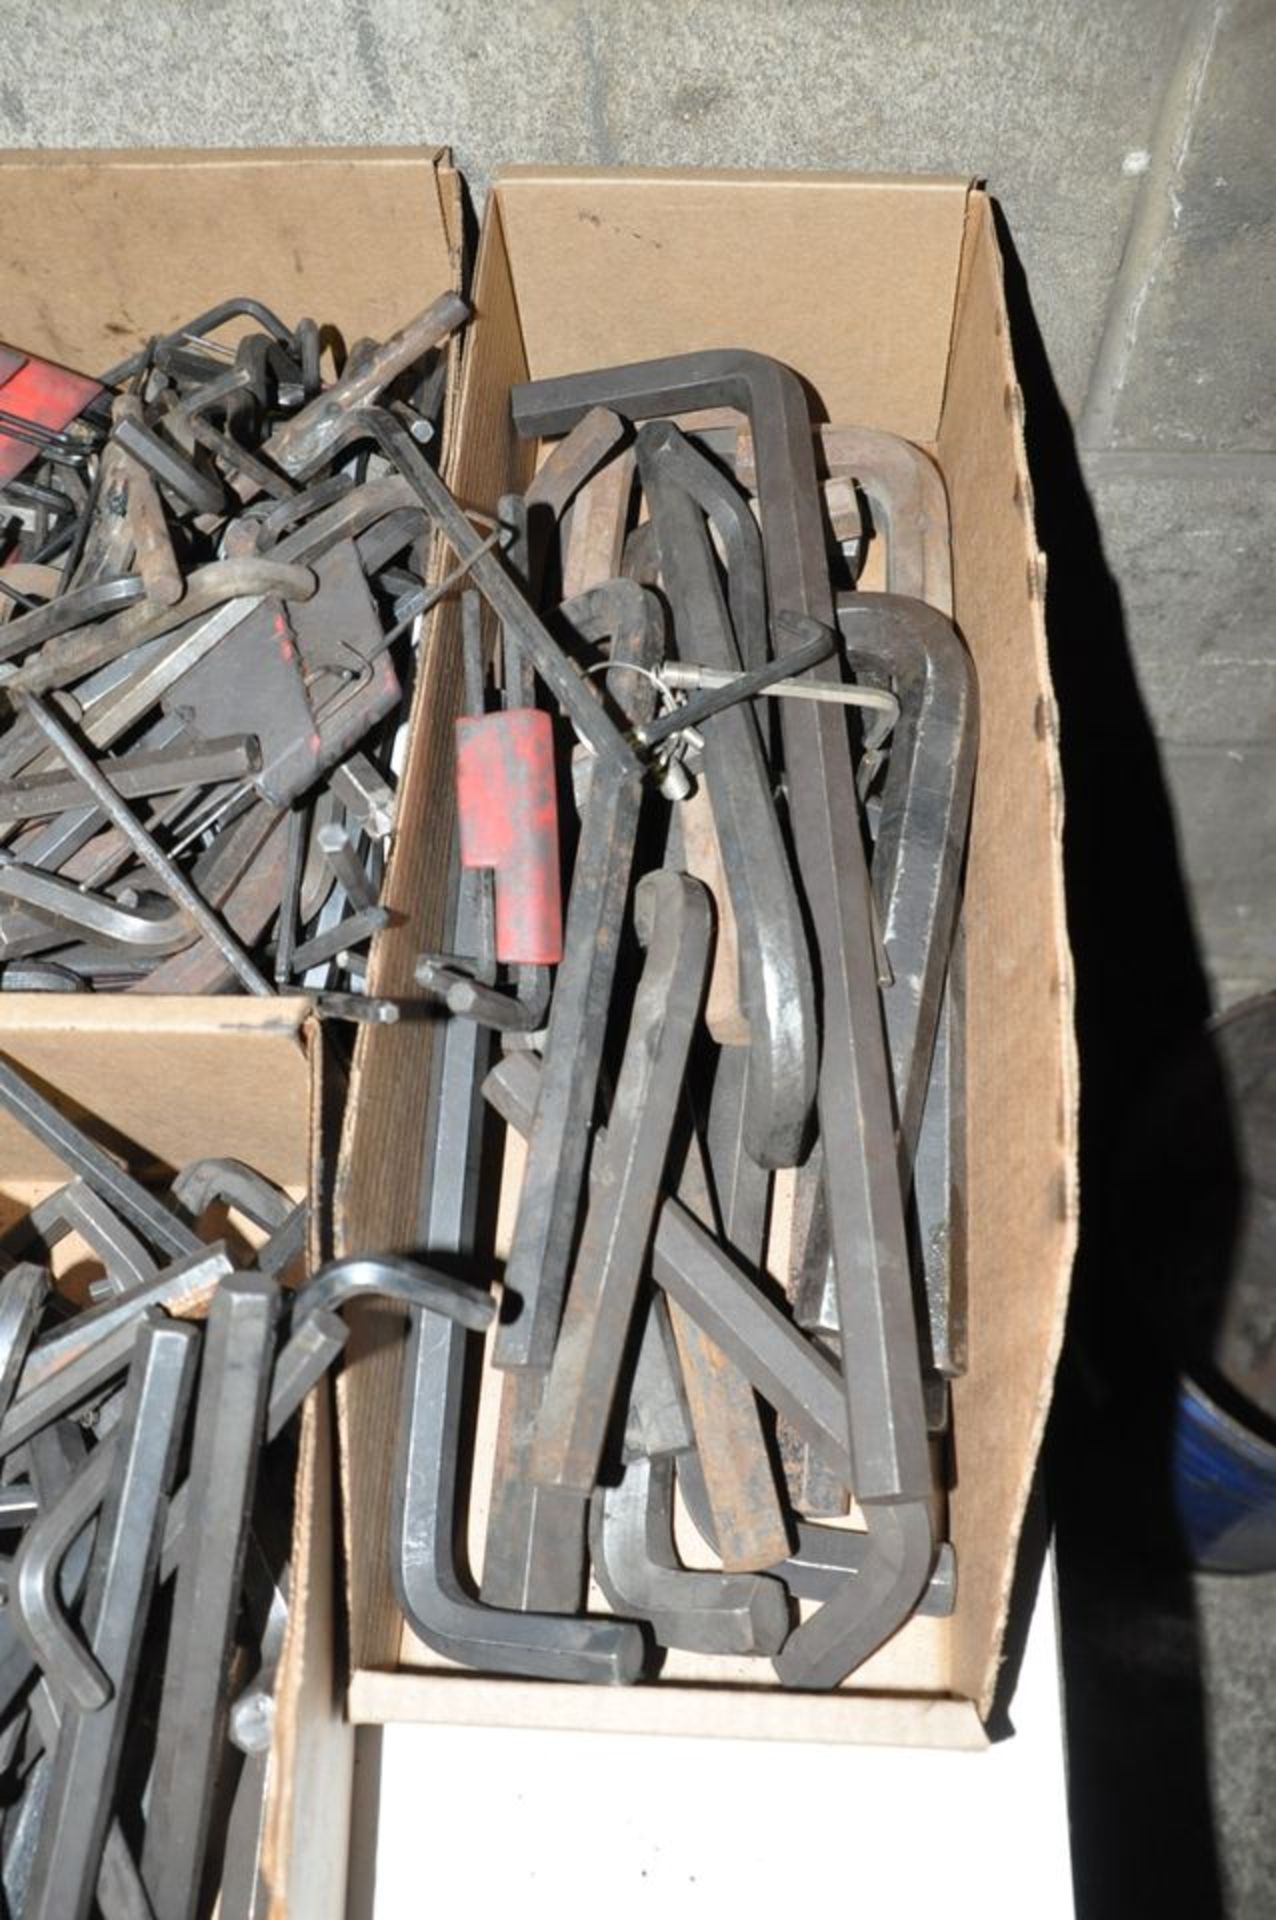 Lot - Allen Wrenches in (3) Boxes, (Machine Shop) - Image 2 of 3